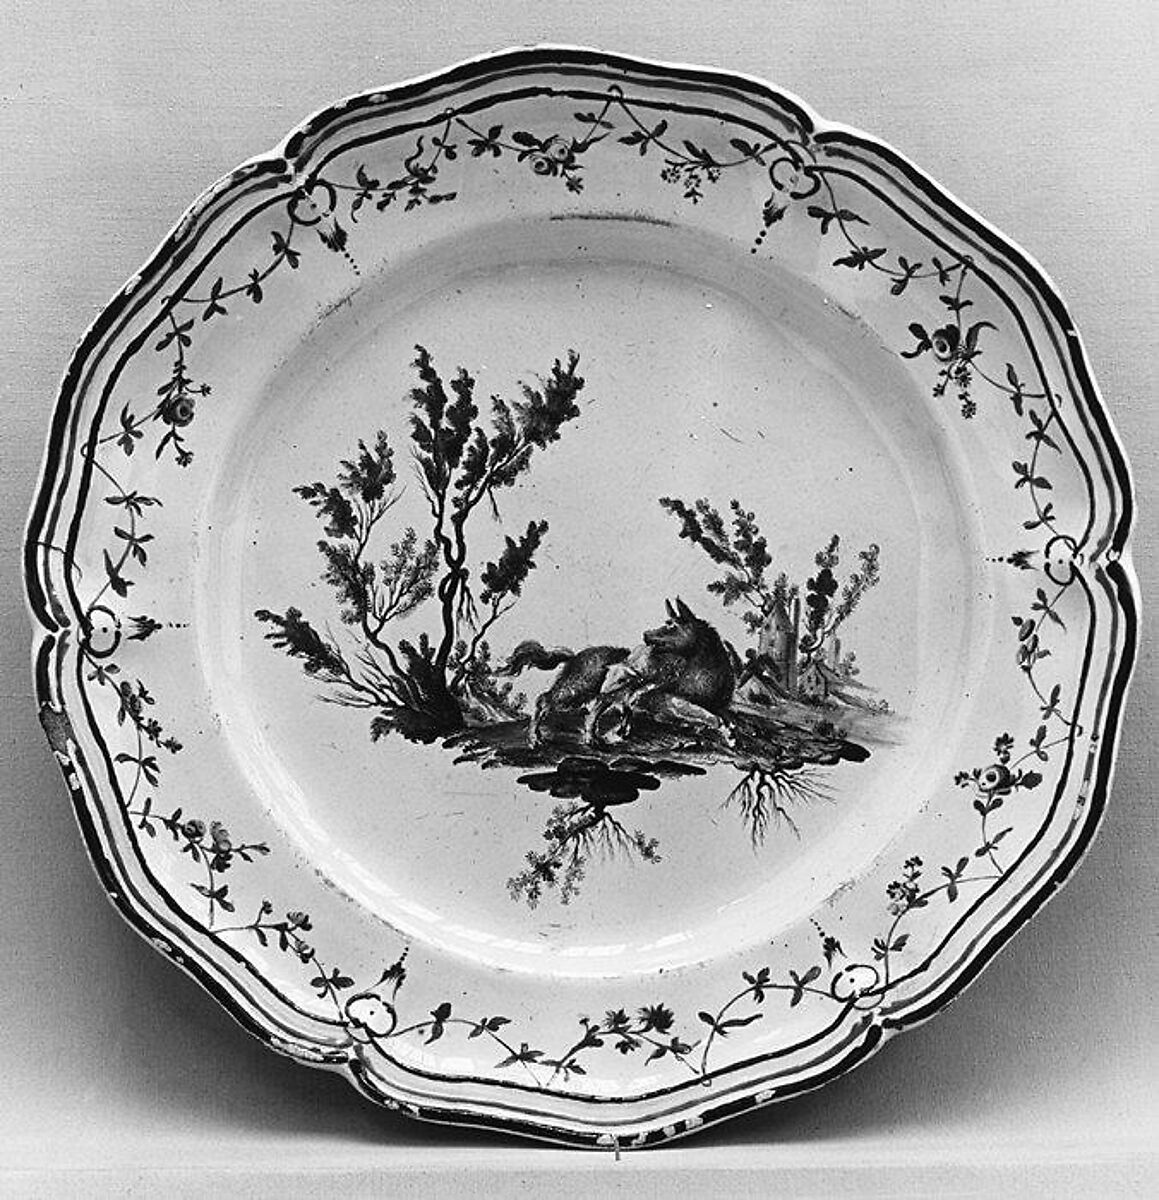 Plate, Faience (tin-glazed earthenware), French, Lunéville or environs 